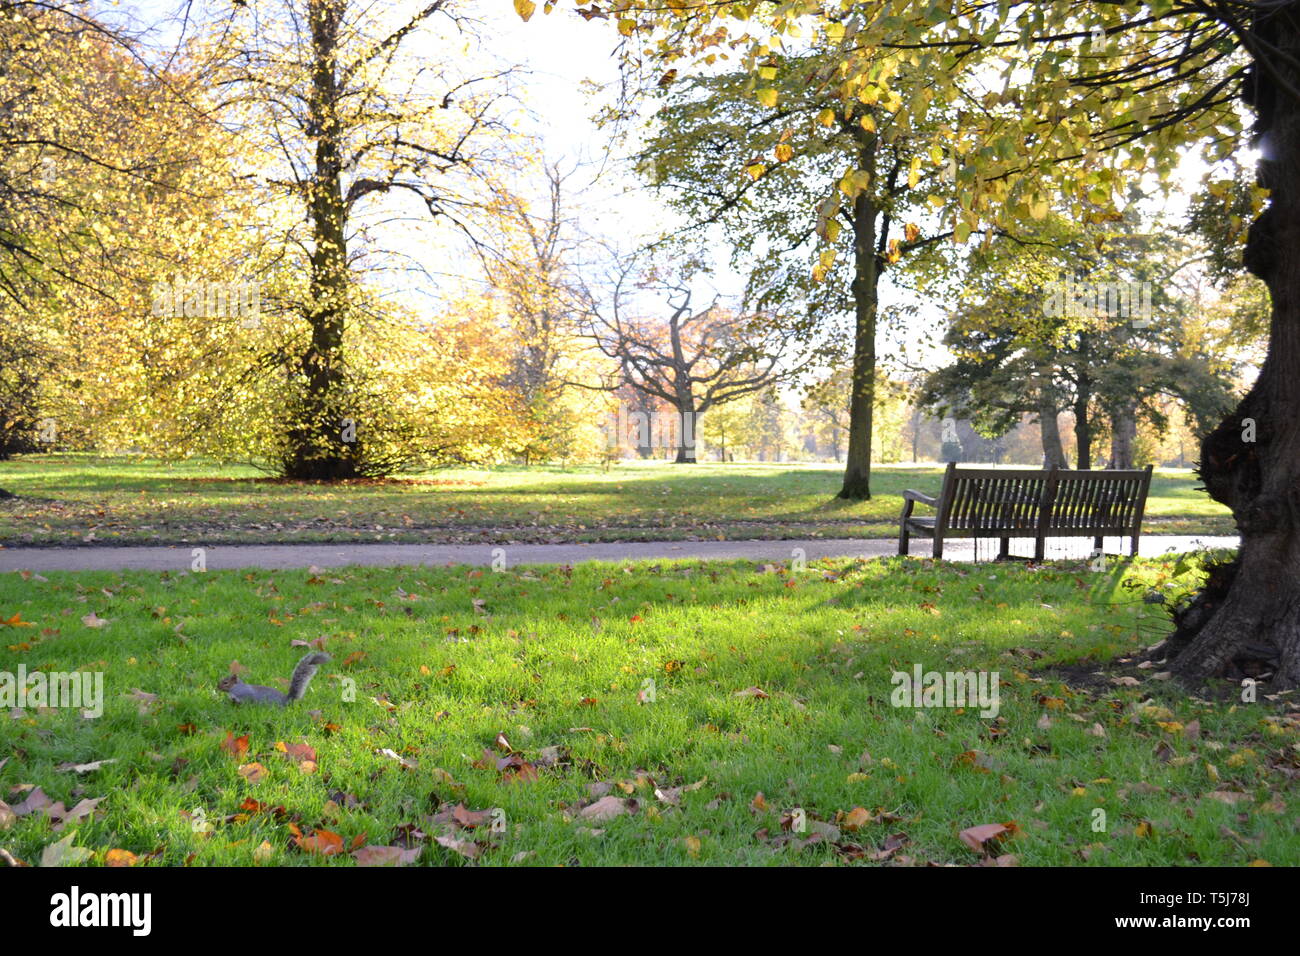 Beautiful autumnal landscape in London royal park with squirrel running in a grass, wooden bench, old trees and backlit illumination in a sunny day. Stock Photo